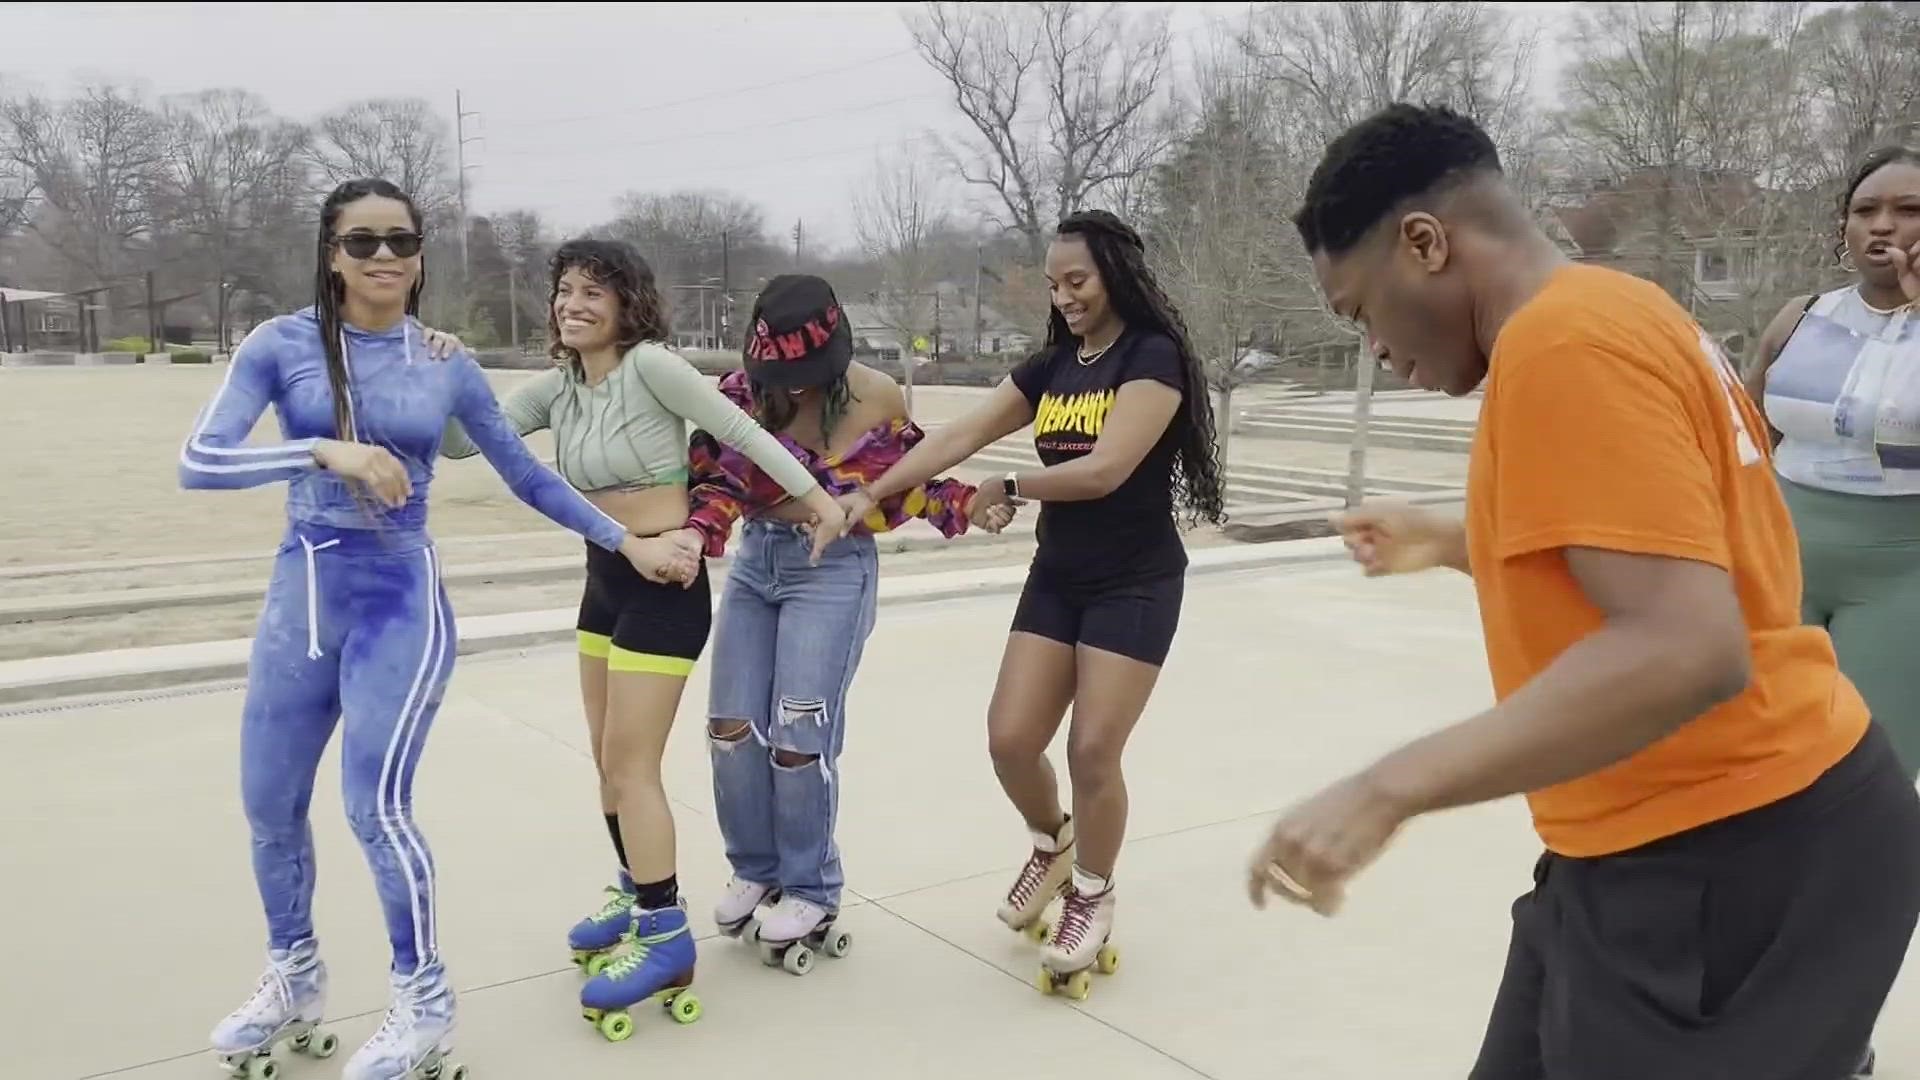 Tasha Klusmann, a historian with The National African American Roller Skating Archive, said that black people have been skating as long as skating has been around.